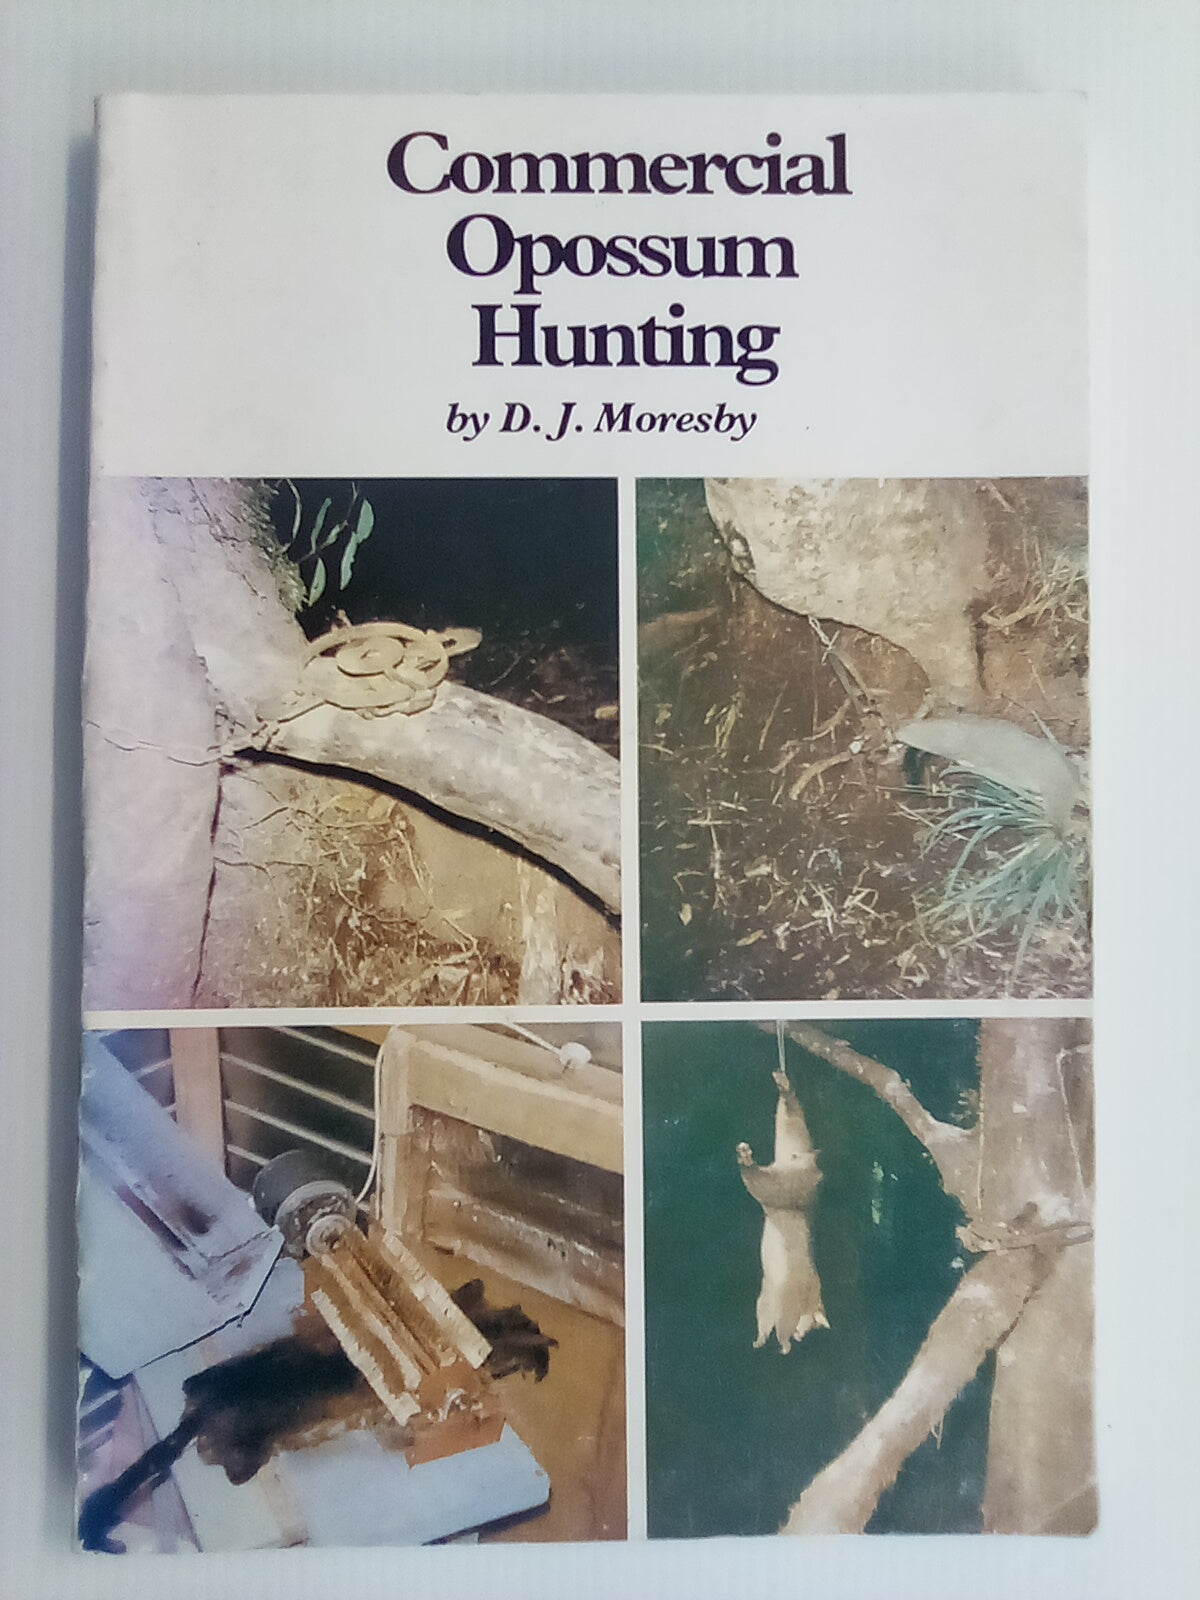 Commercial Opossum Hunting by D.J. Moresby